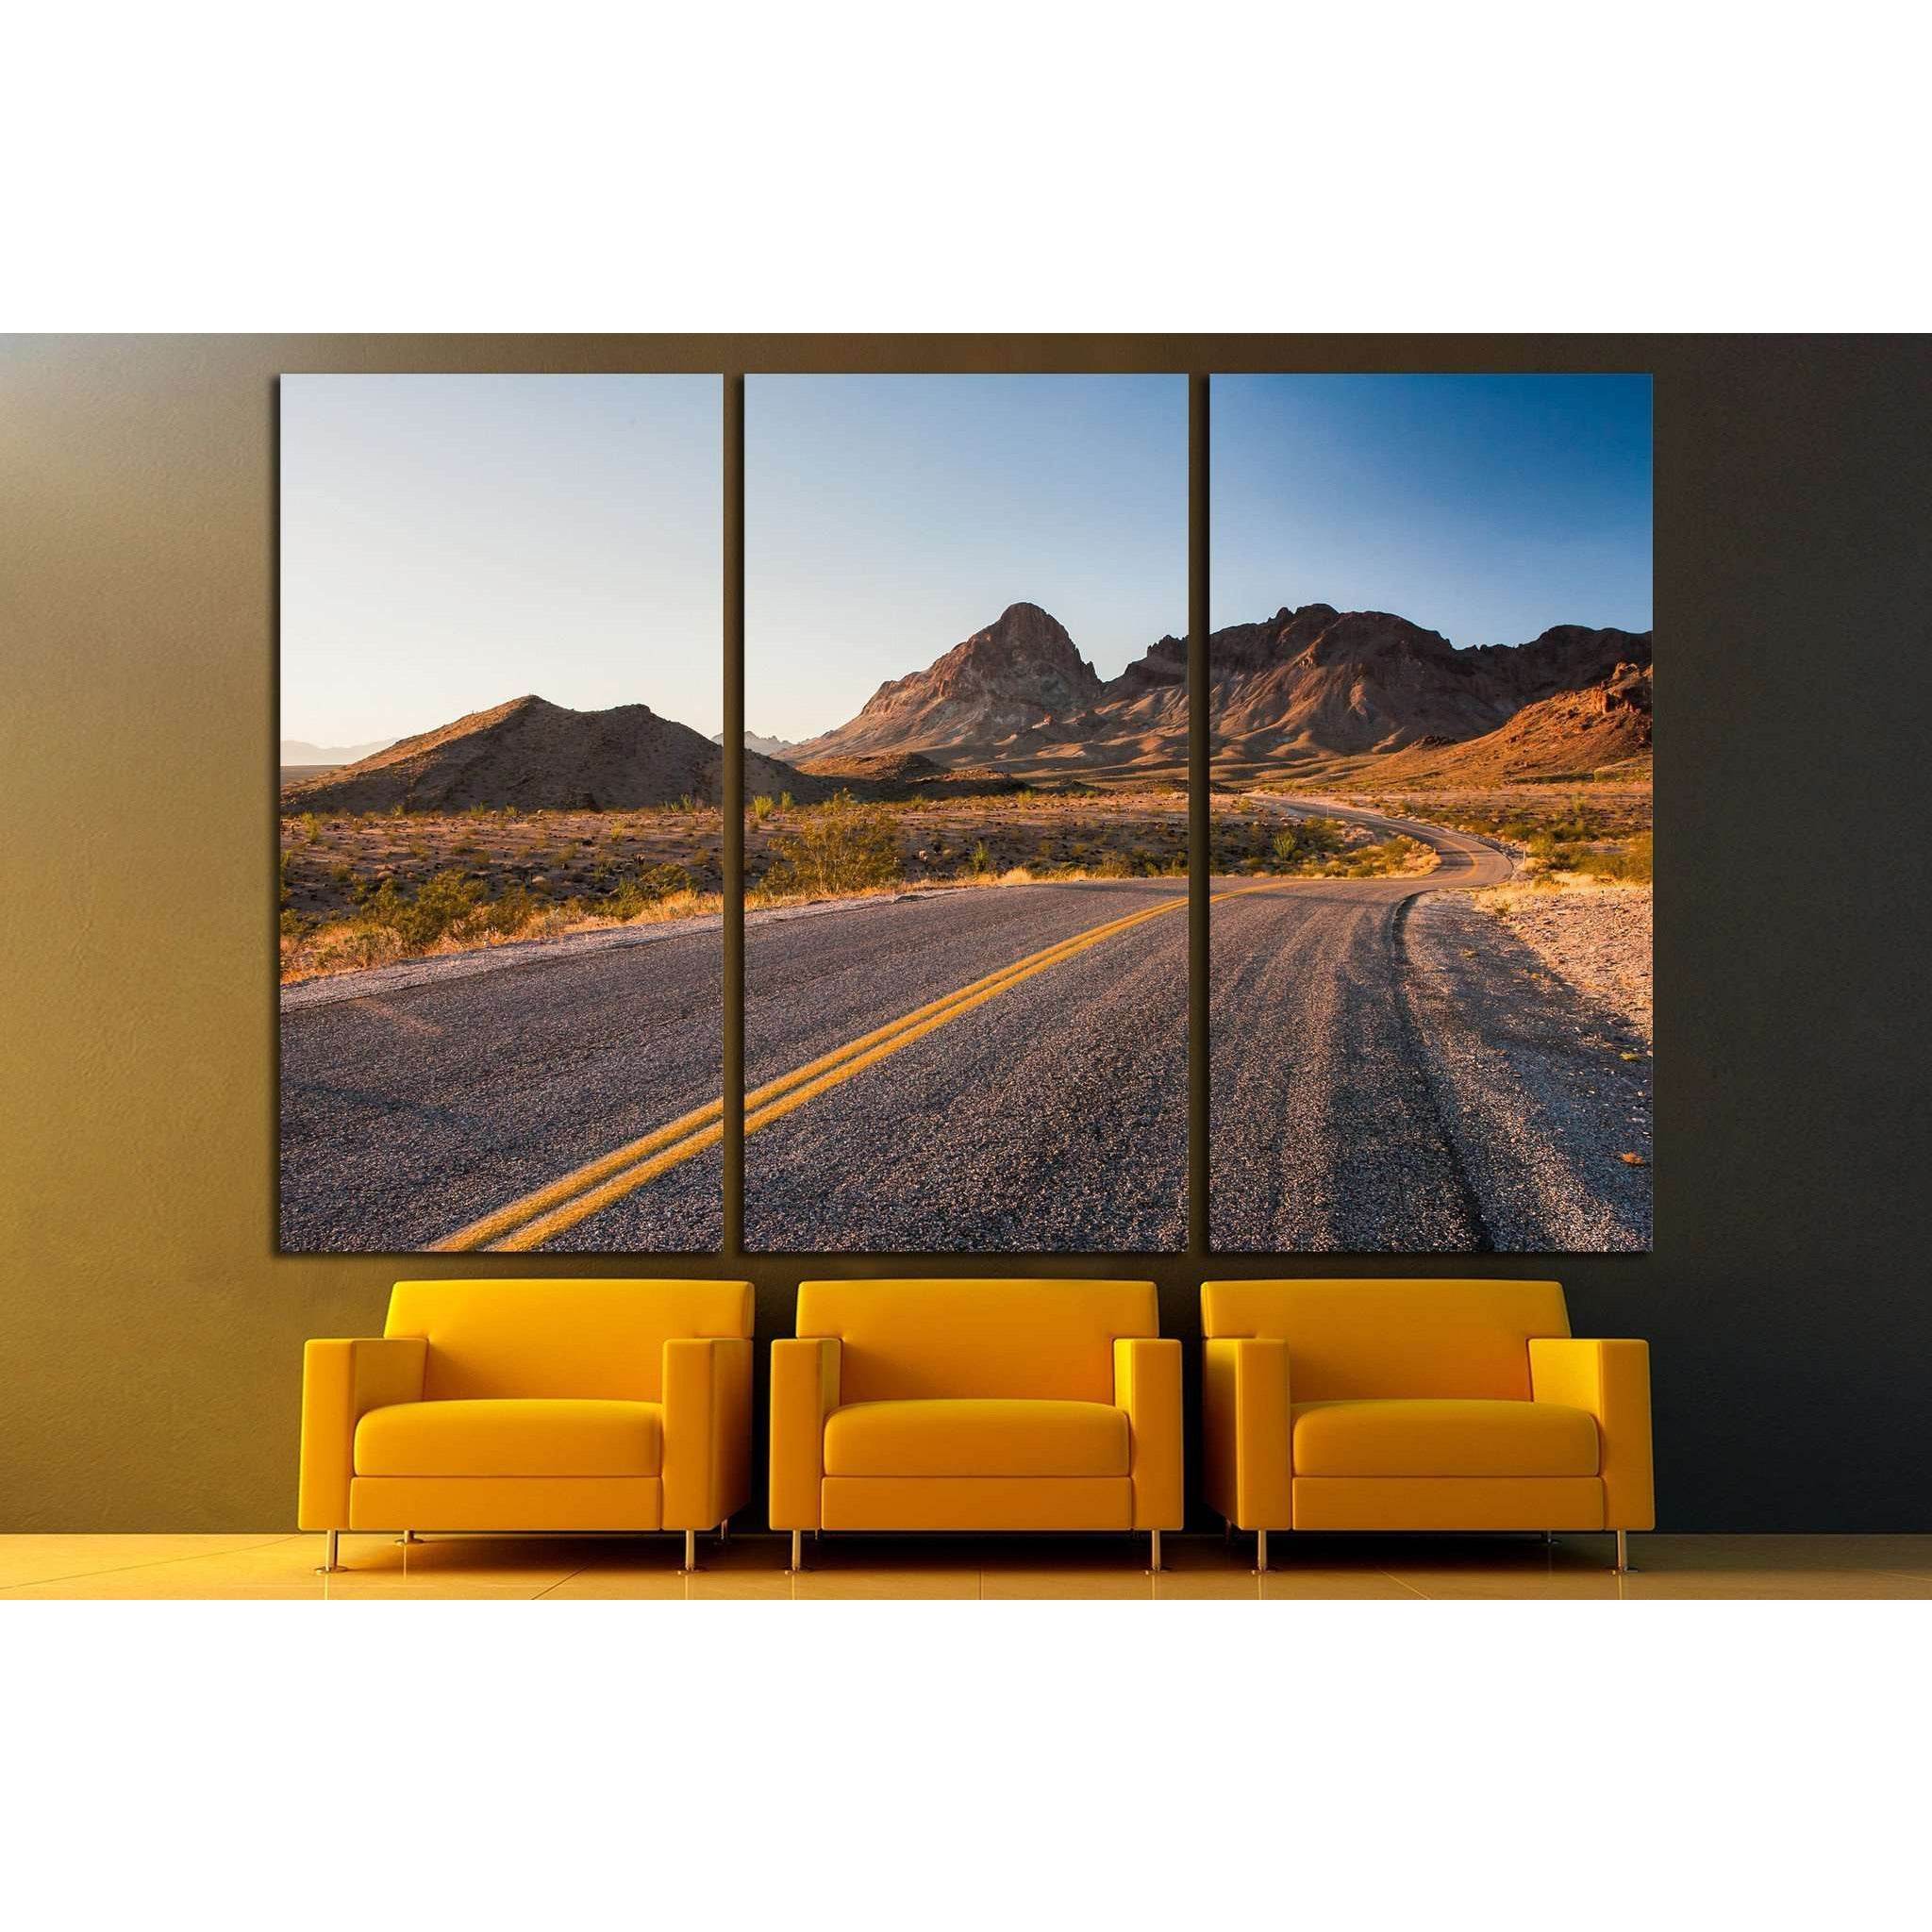 beutiful stretch of historic route 66 №2106 Ready to Hang Canvas Print